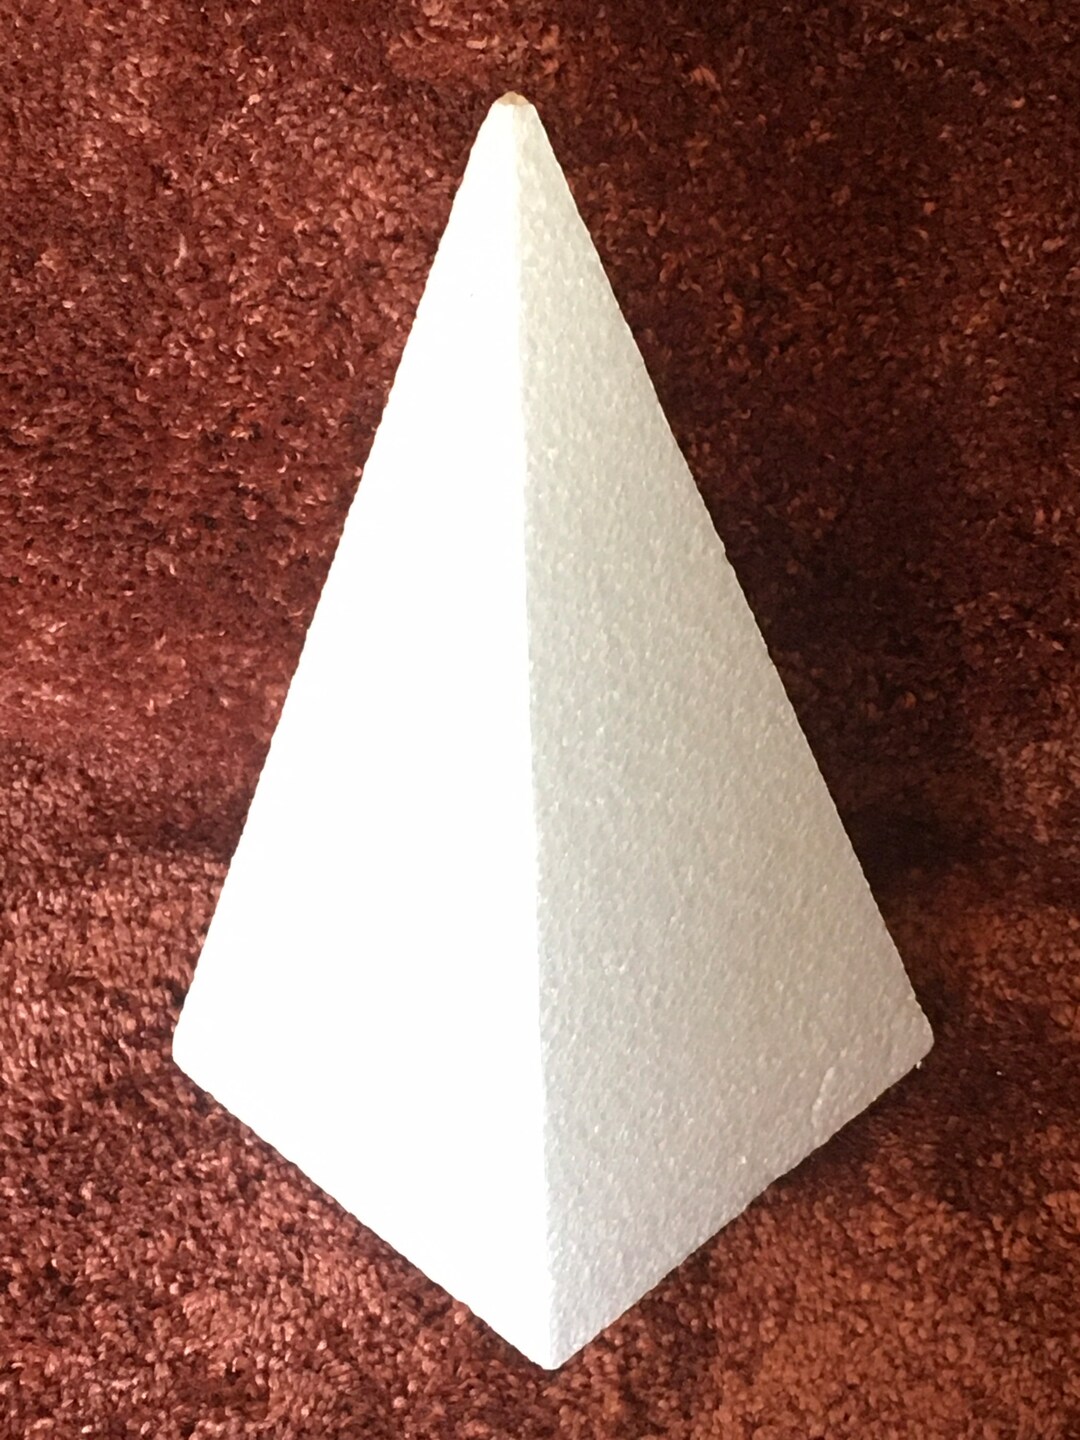 Extra Large Styrofoam Cones in Sets of Two, Two Sizes Height 30 Cm 11.81 or  39.5cm 15.55, Base Diameter 11 Cm 4.33 or 12.5cm 4.92 -  UK